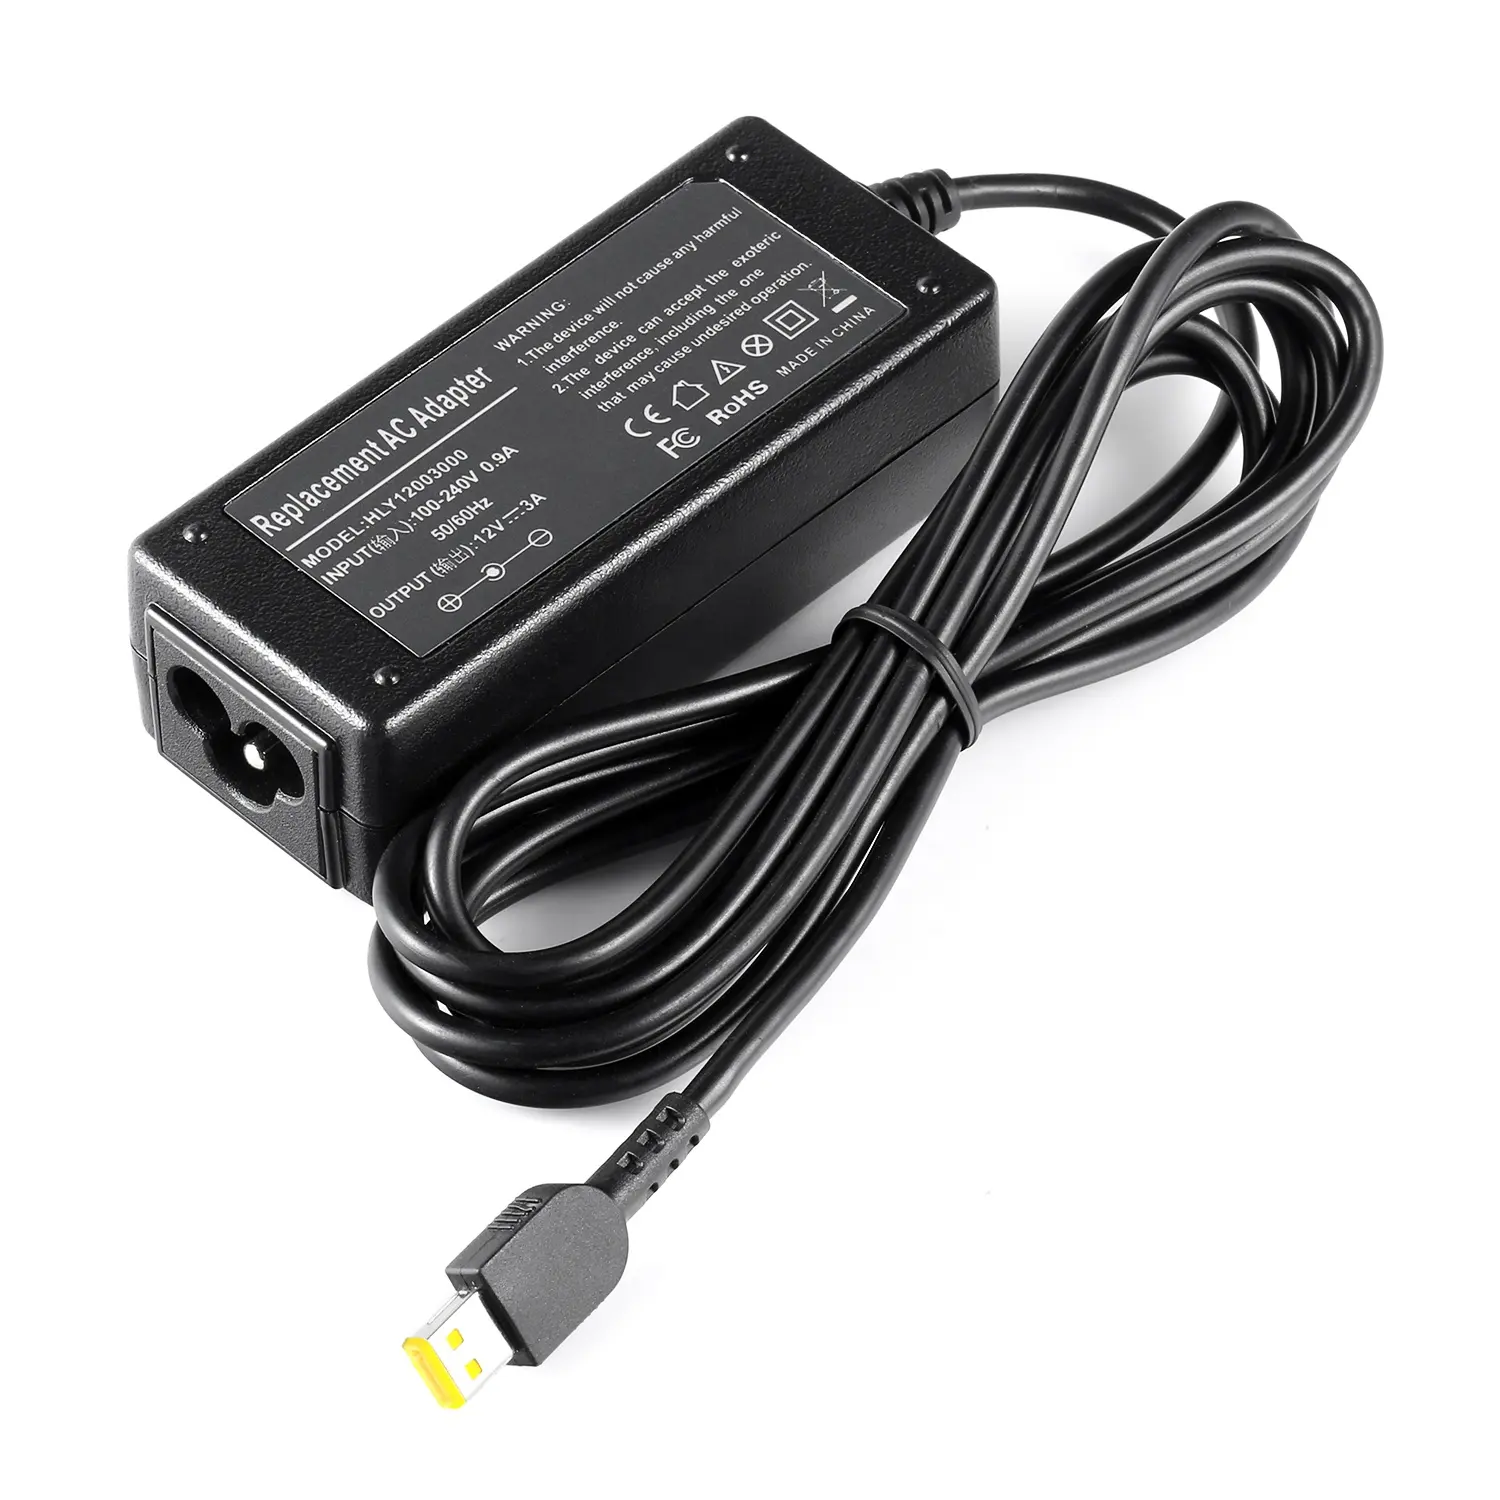 Replacement 12V 3A USB laptop power supply AC adaptor smart usb charger Adapte 36w for IBM lenovoThinkPad Tablet 10